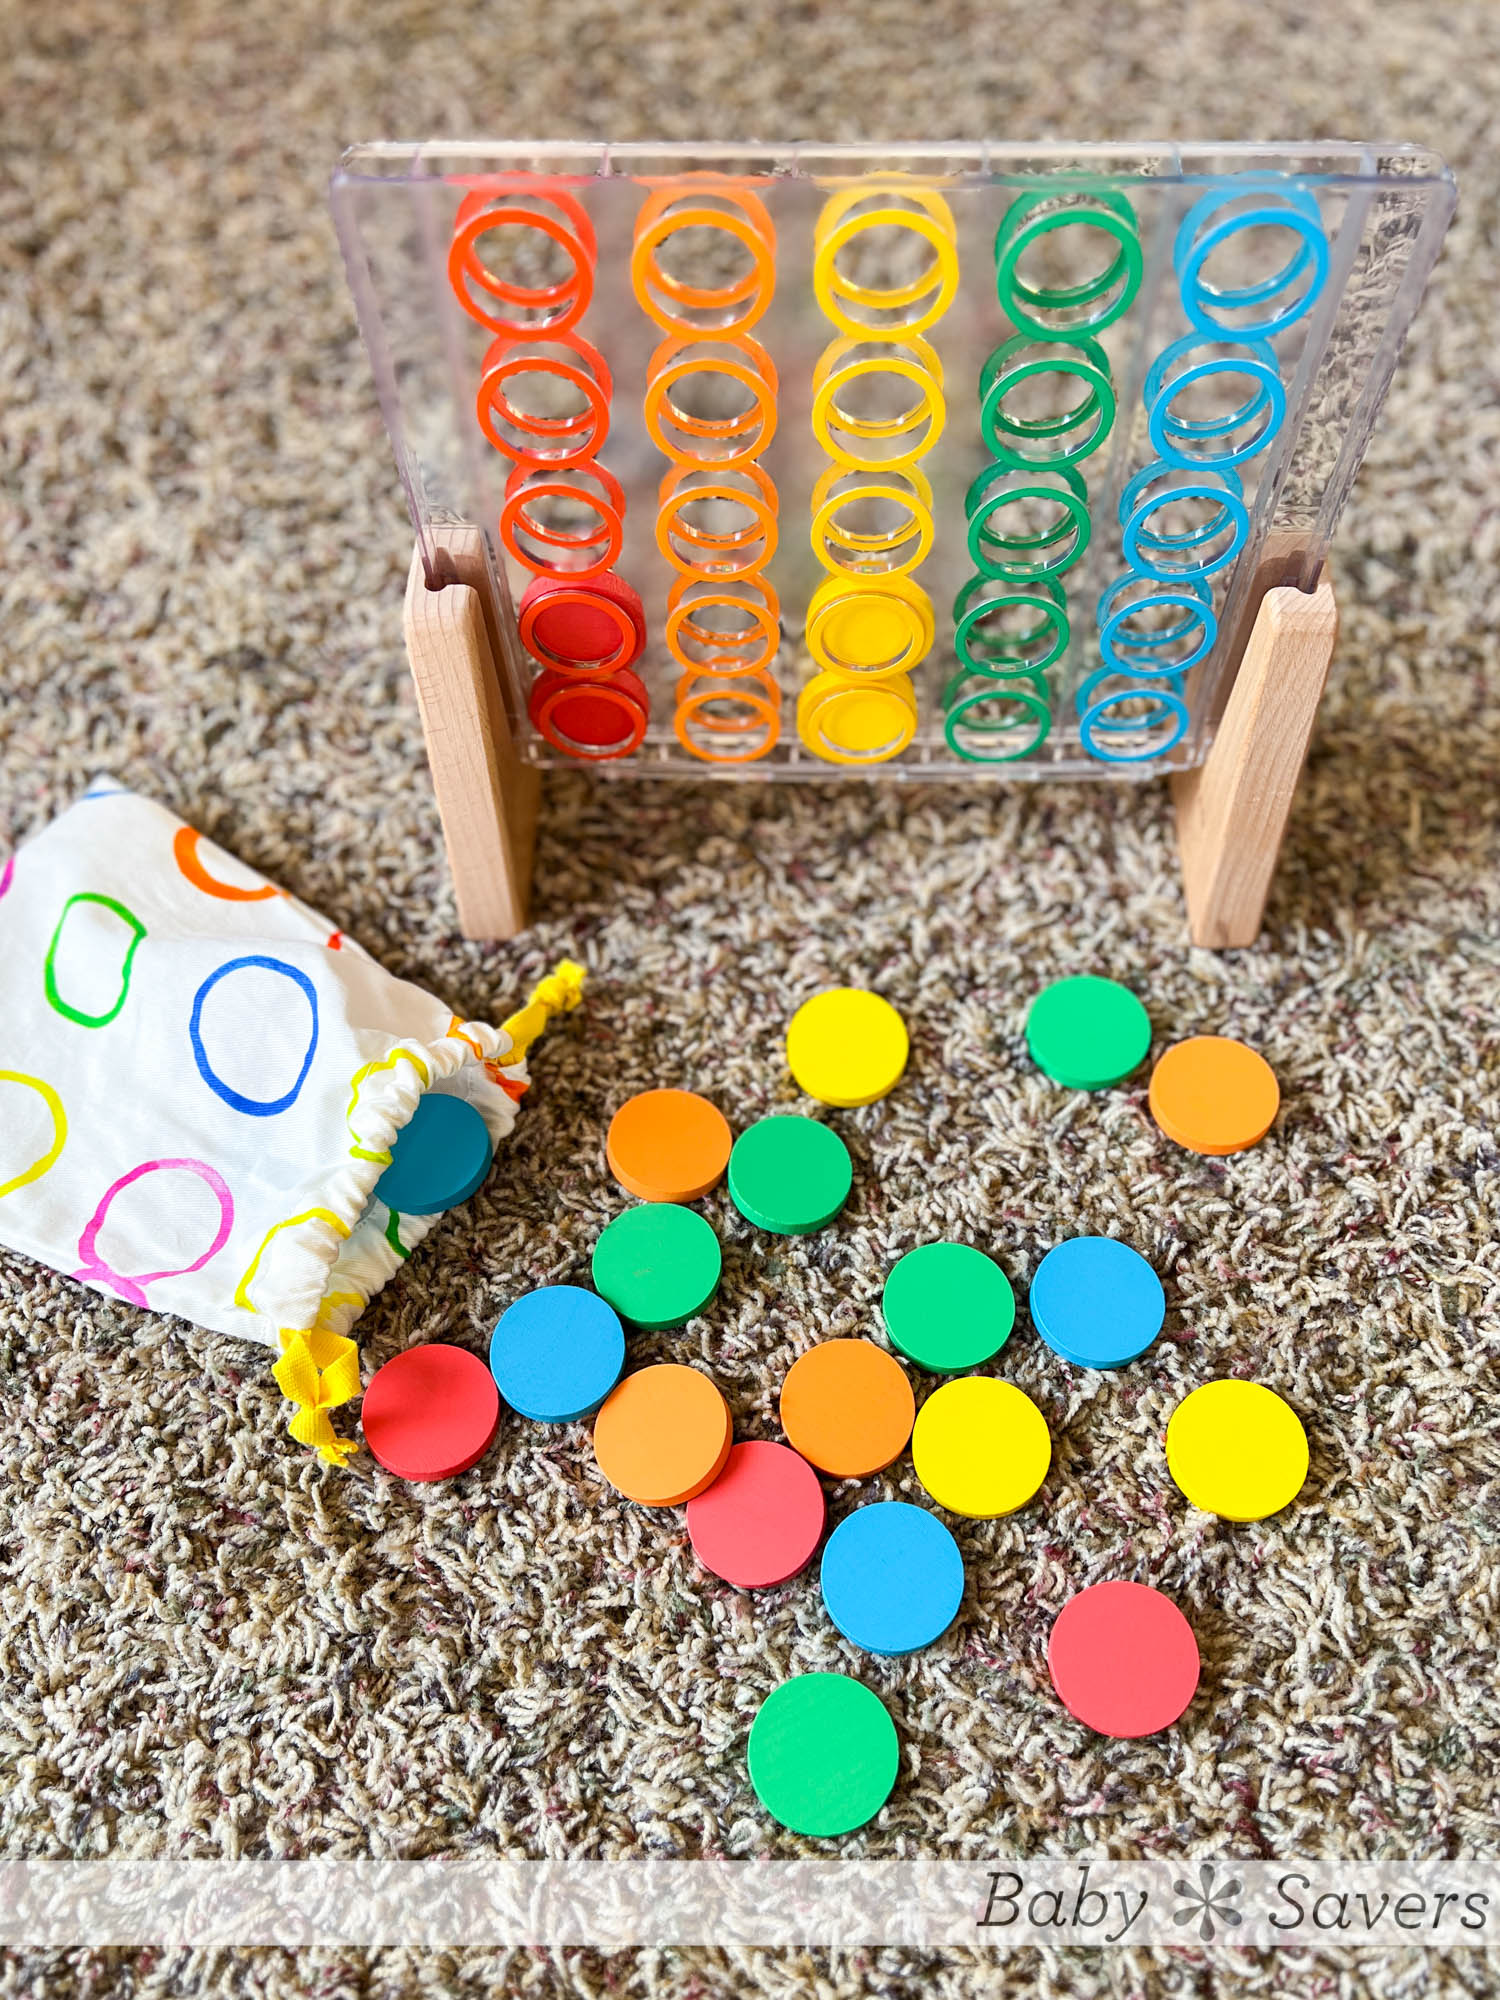 lovevery play kit reviews dot and dash color sorter montessori toy